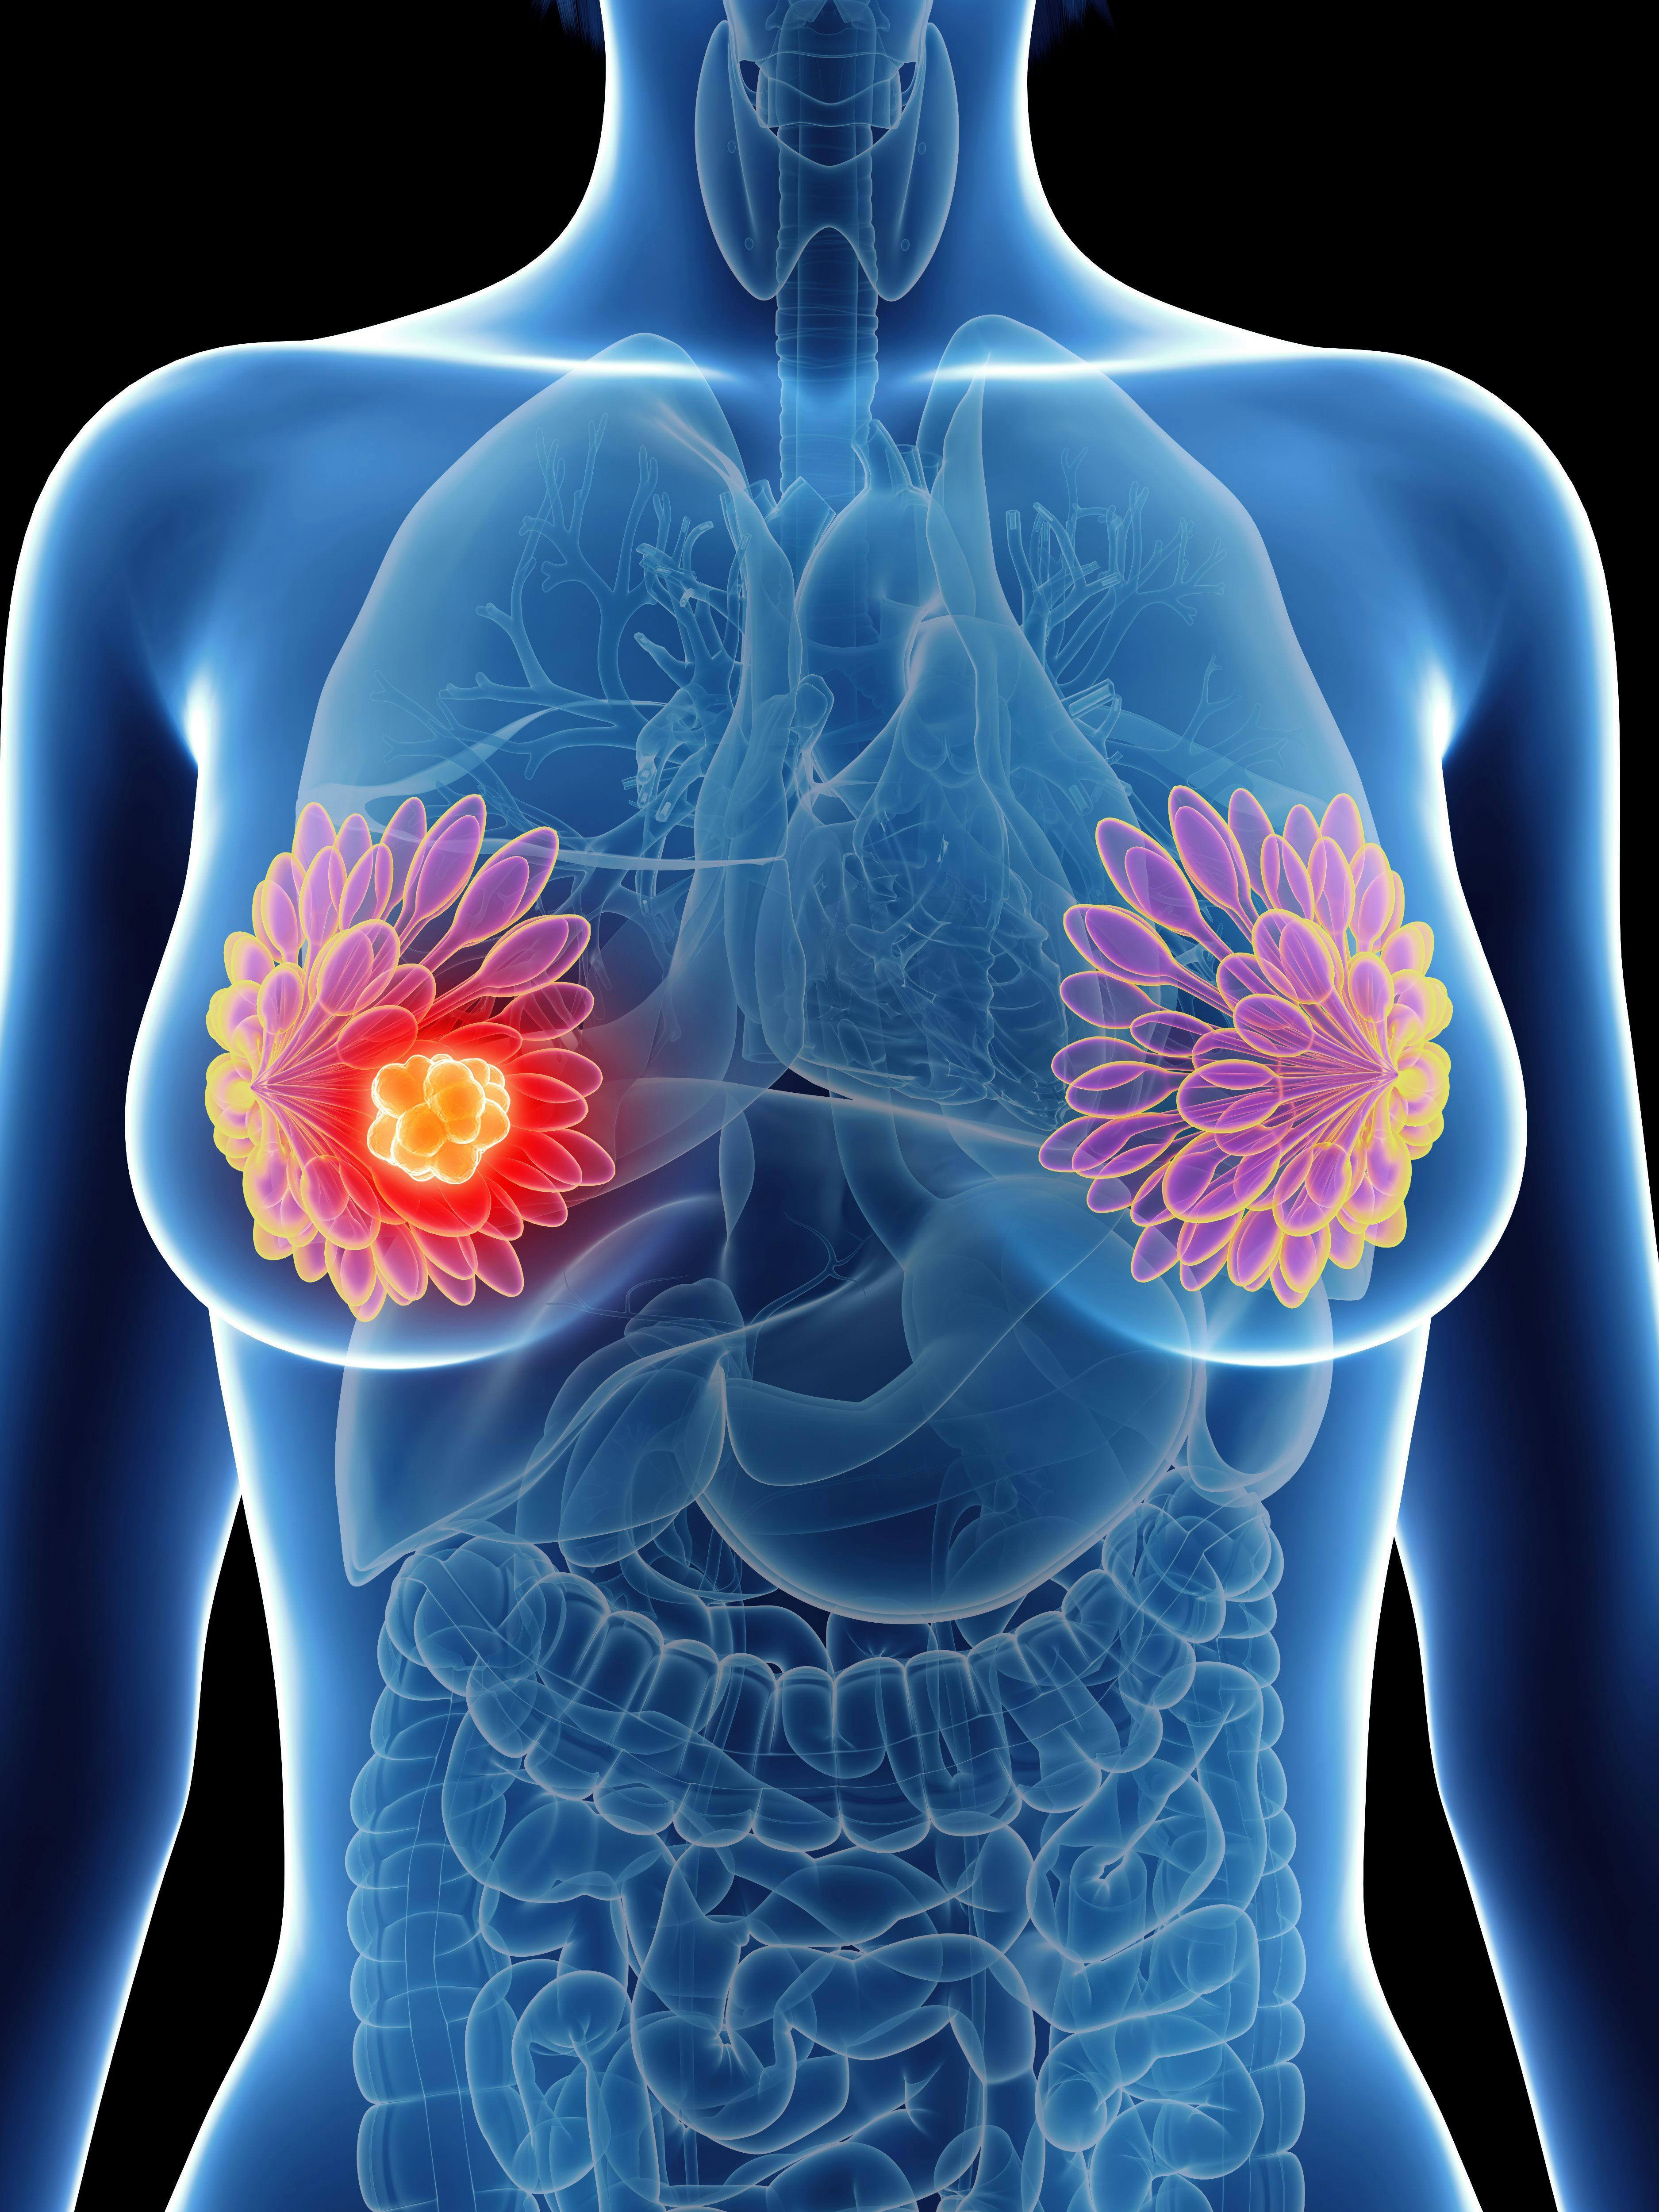 Although the addition of carboplatin to neoadjuvant paclitaxel followed by cyclophosphamide helped to improve outcomes for those with treatment-naïve triple-negative breast cancer (TNBC), the addition of veliparib did not have an impact on pathologic complete response or event-free survival.